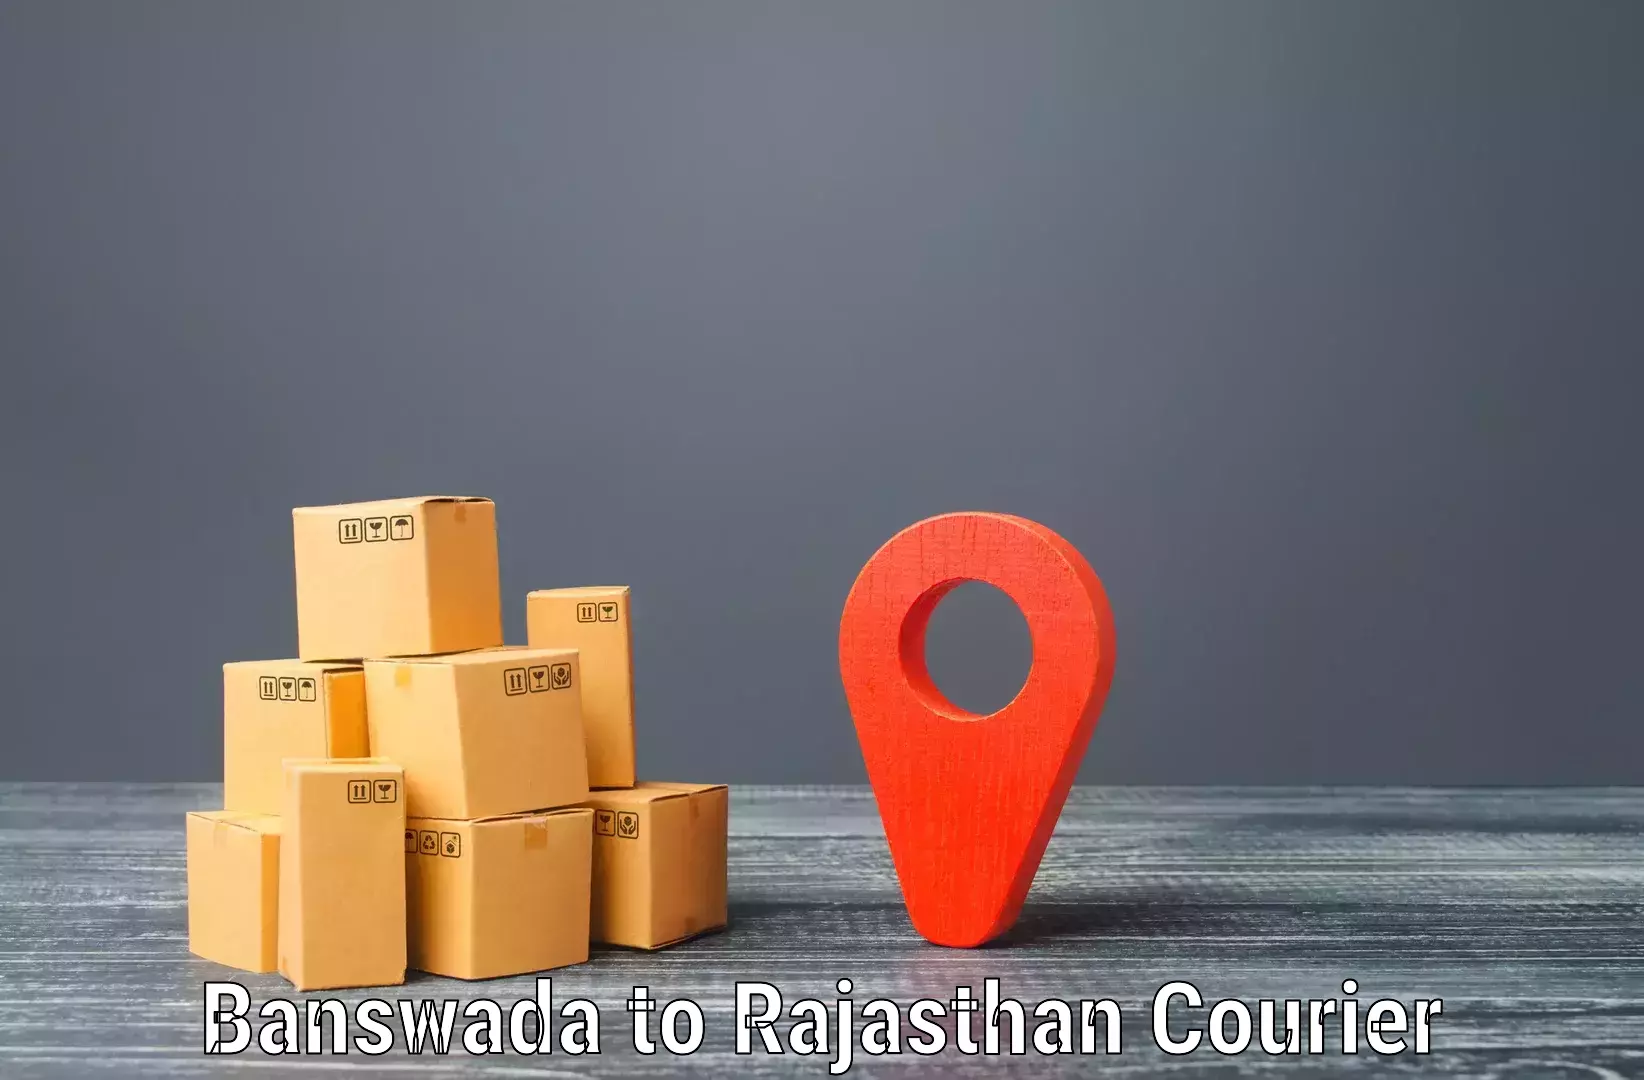 Courier service efficiency Banswada to Fatehpur Sikar